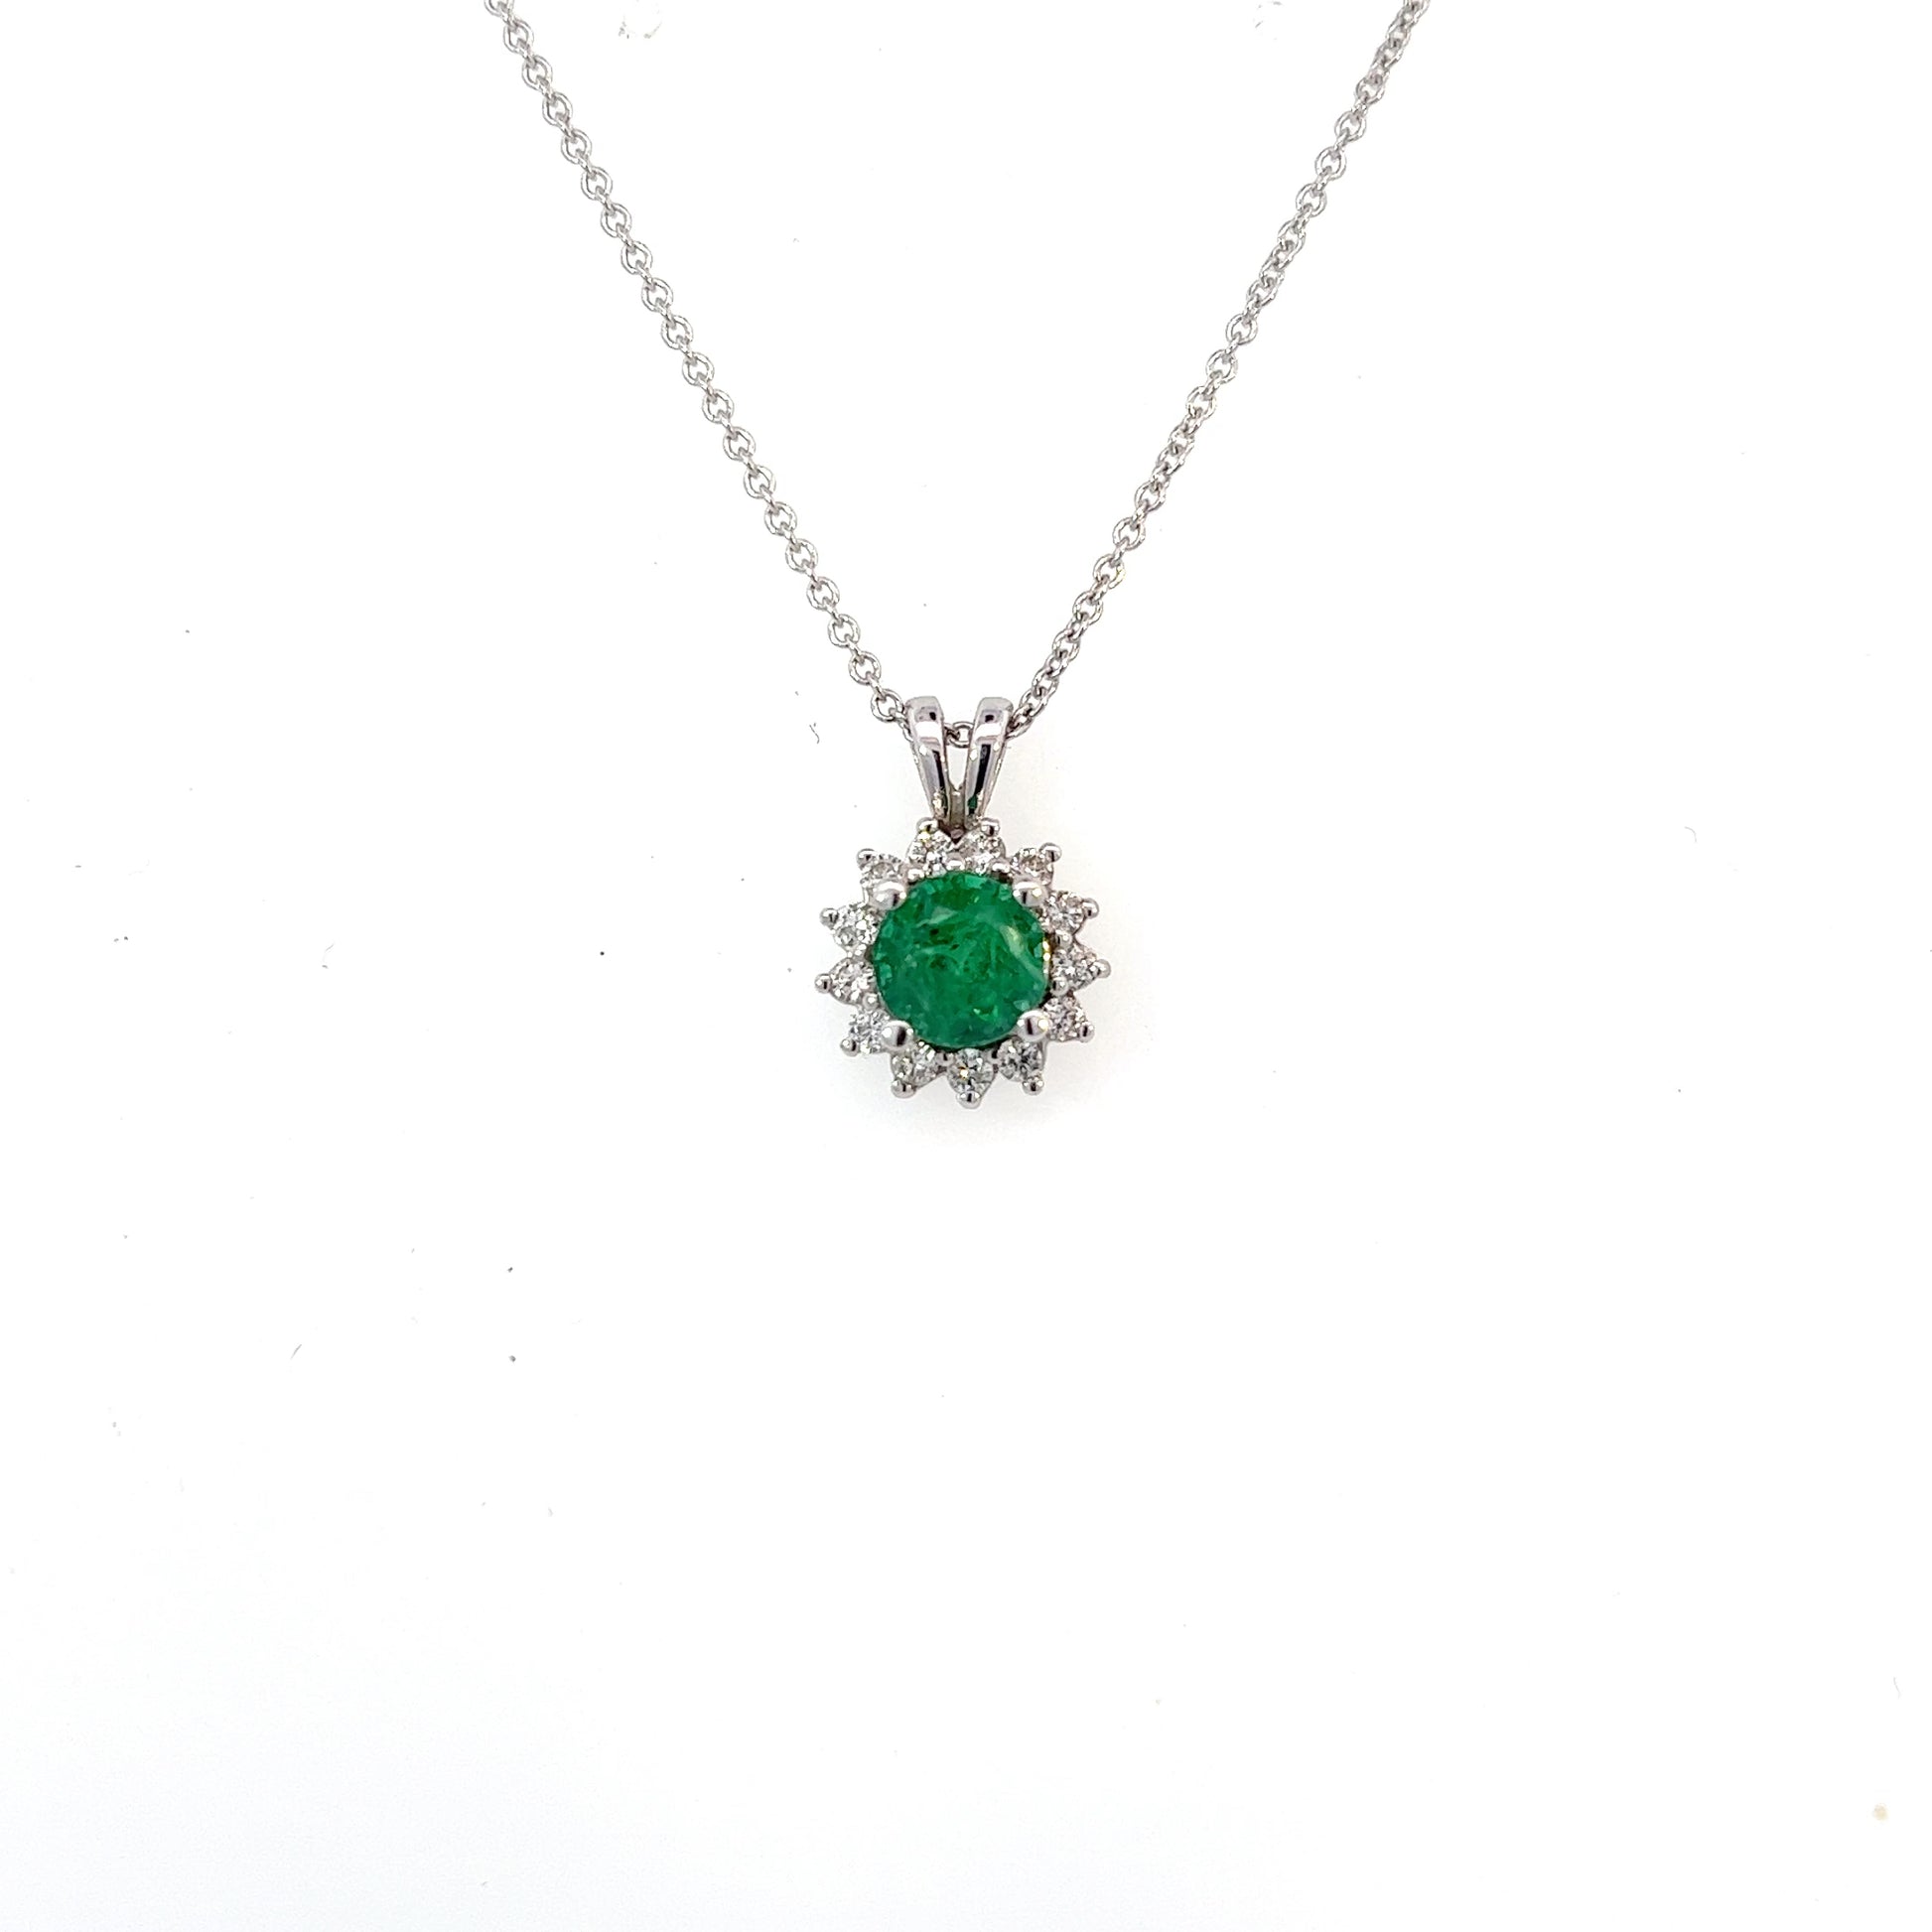 Natural Emerald Diamond Pendant With Chain 17.5" 14k WG 1.35 TCW Certified $4,975 216665